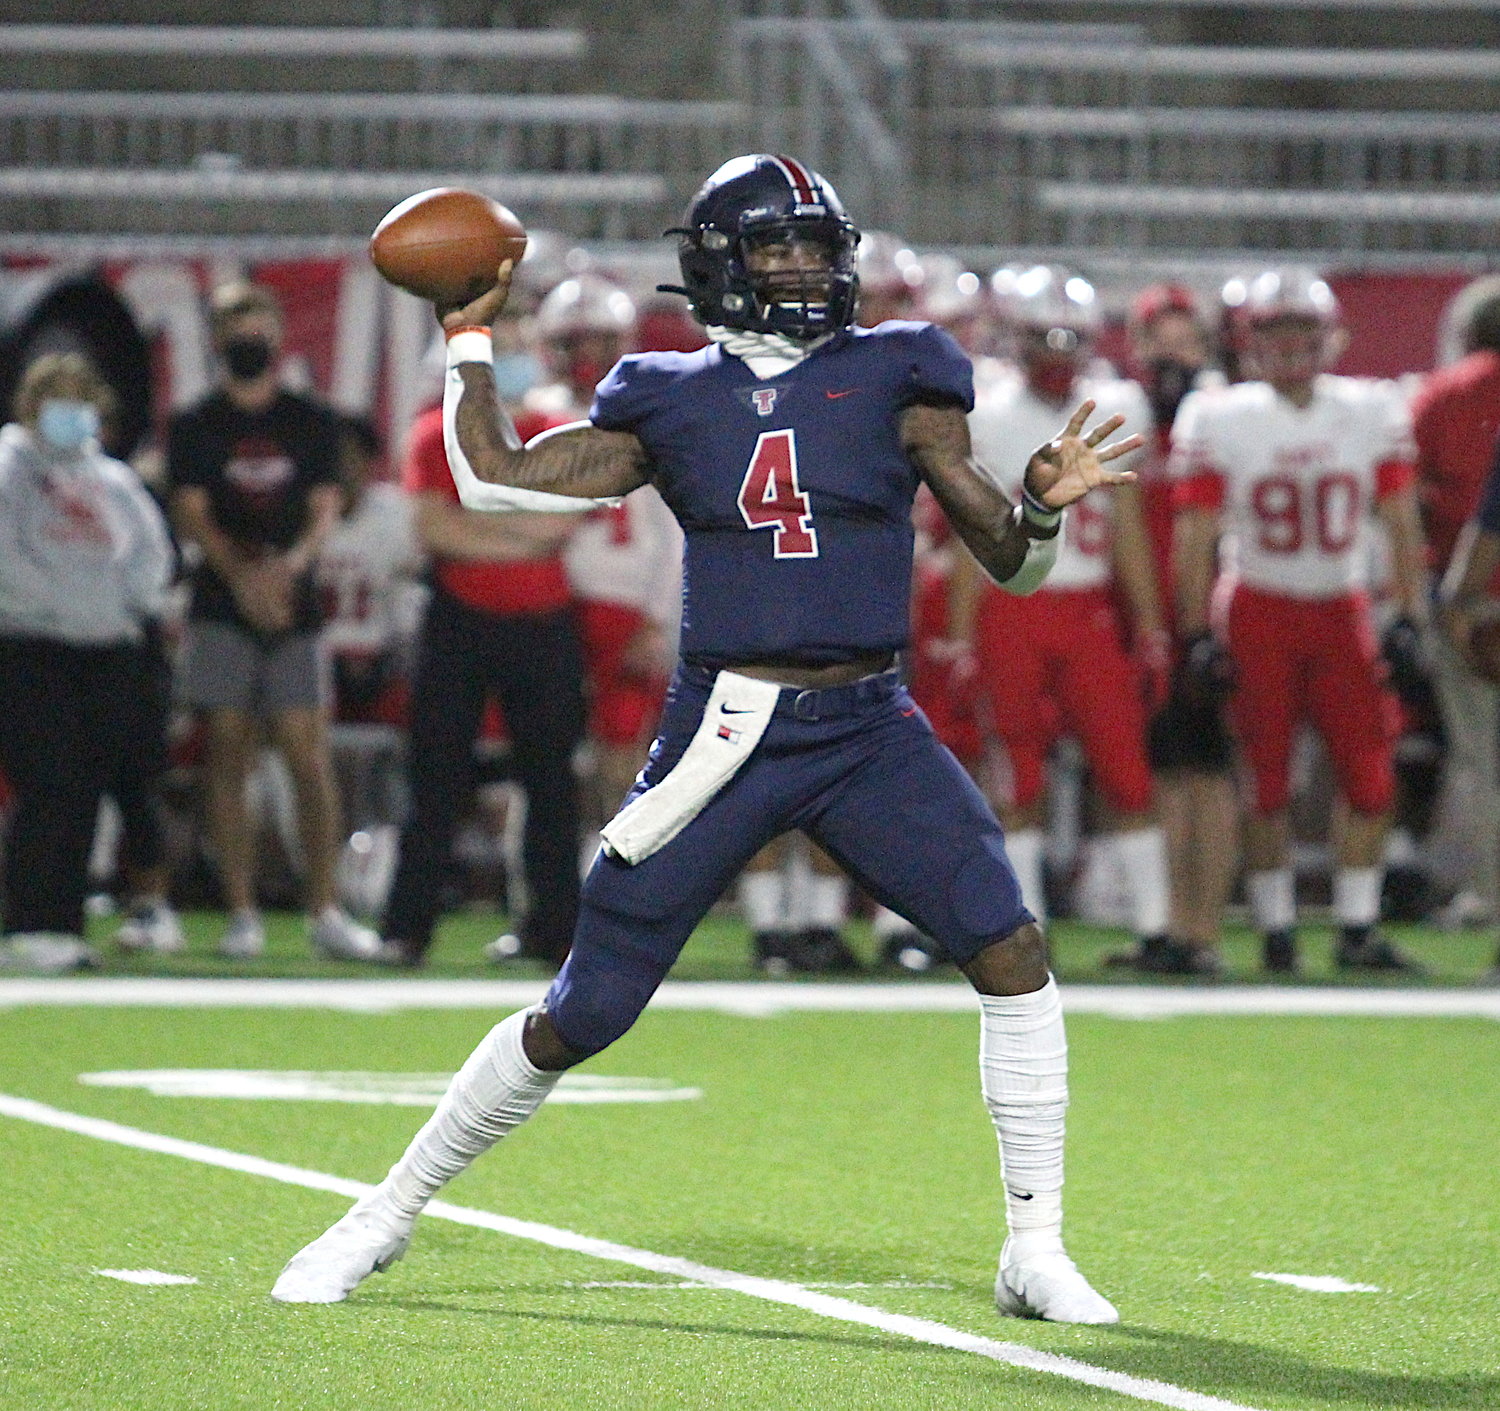 Tompkins senior quarterback Jalen Milroe is one of 25 finalists for Dave Campbell’s Texas Football’s Mr. Texas Football High School Player of the Year award.